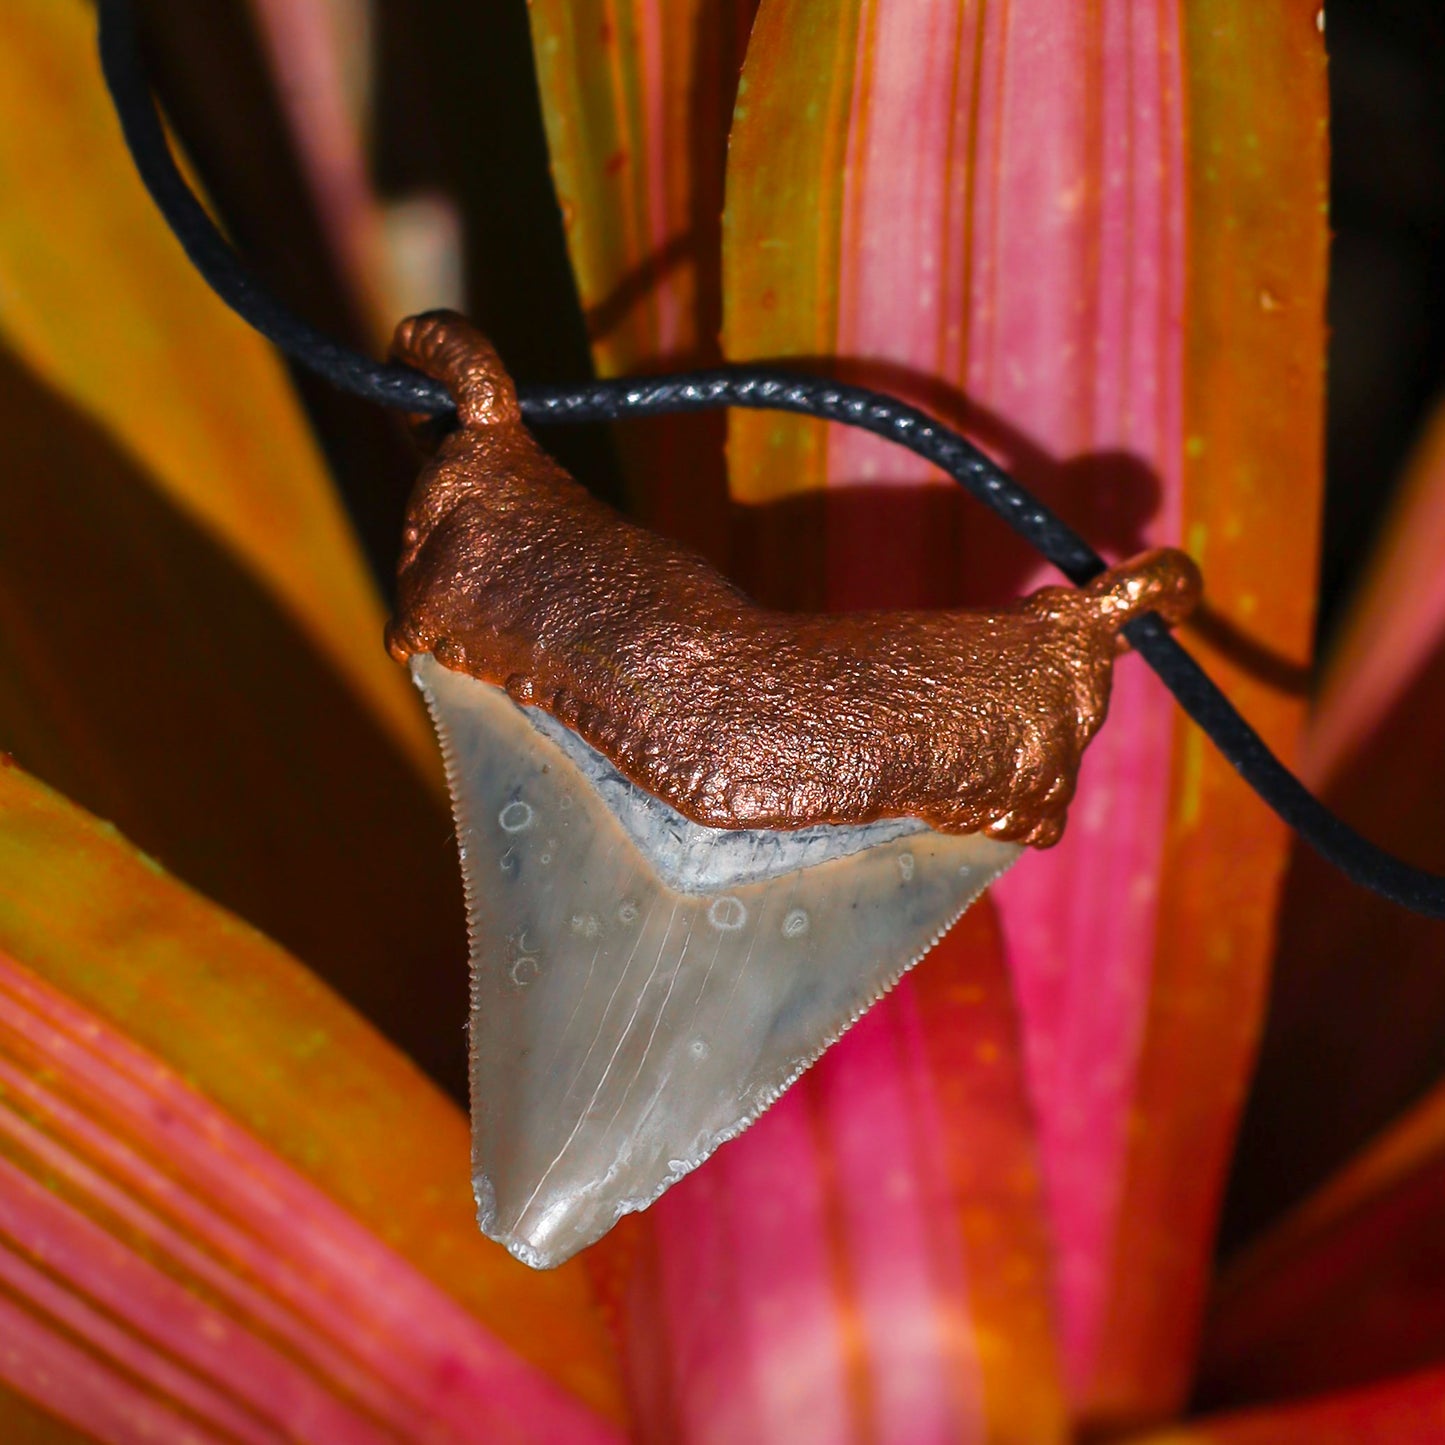 Florida Fossil MEGALODON Shark Tooth Necklace Copper Pendant